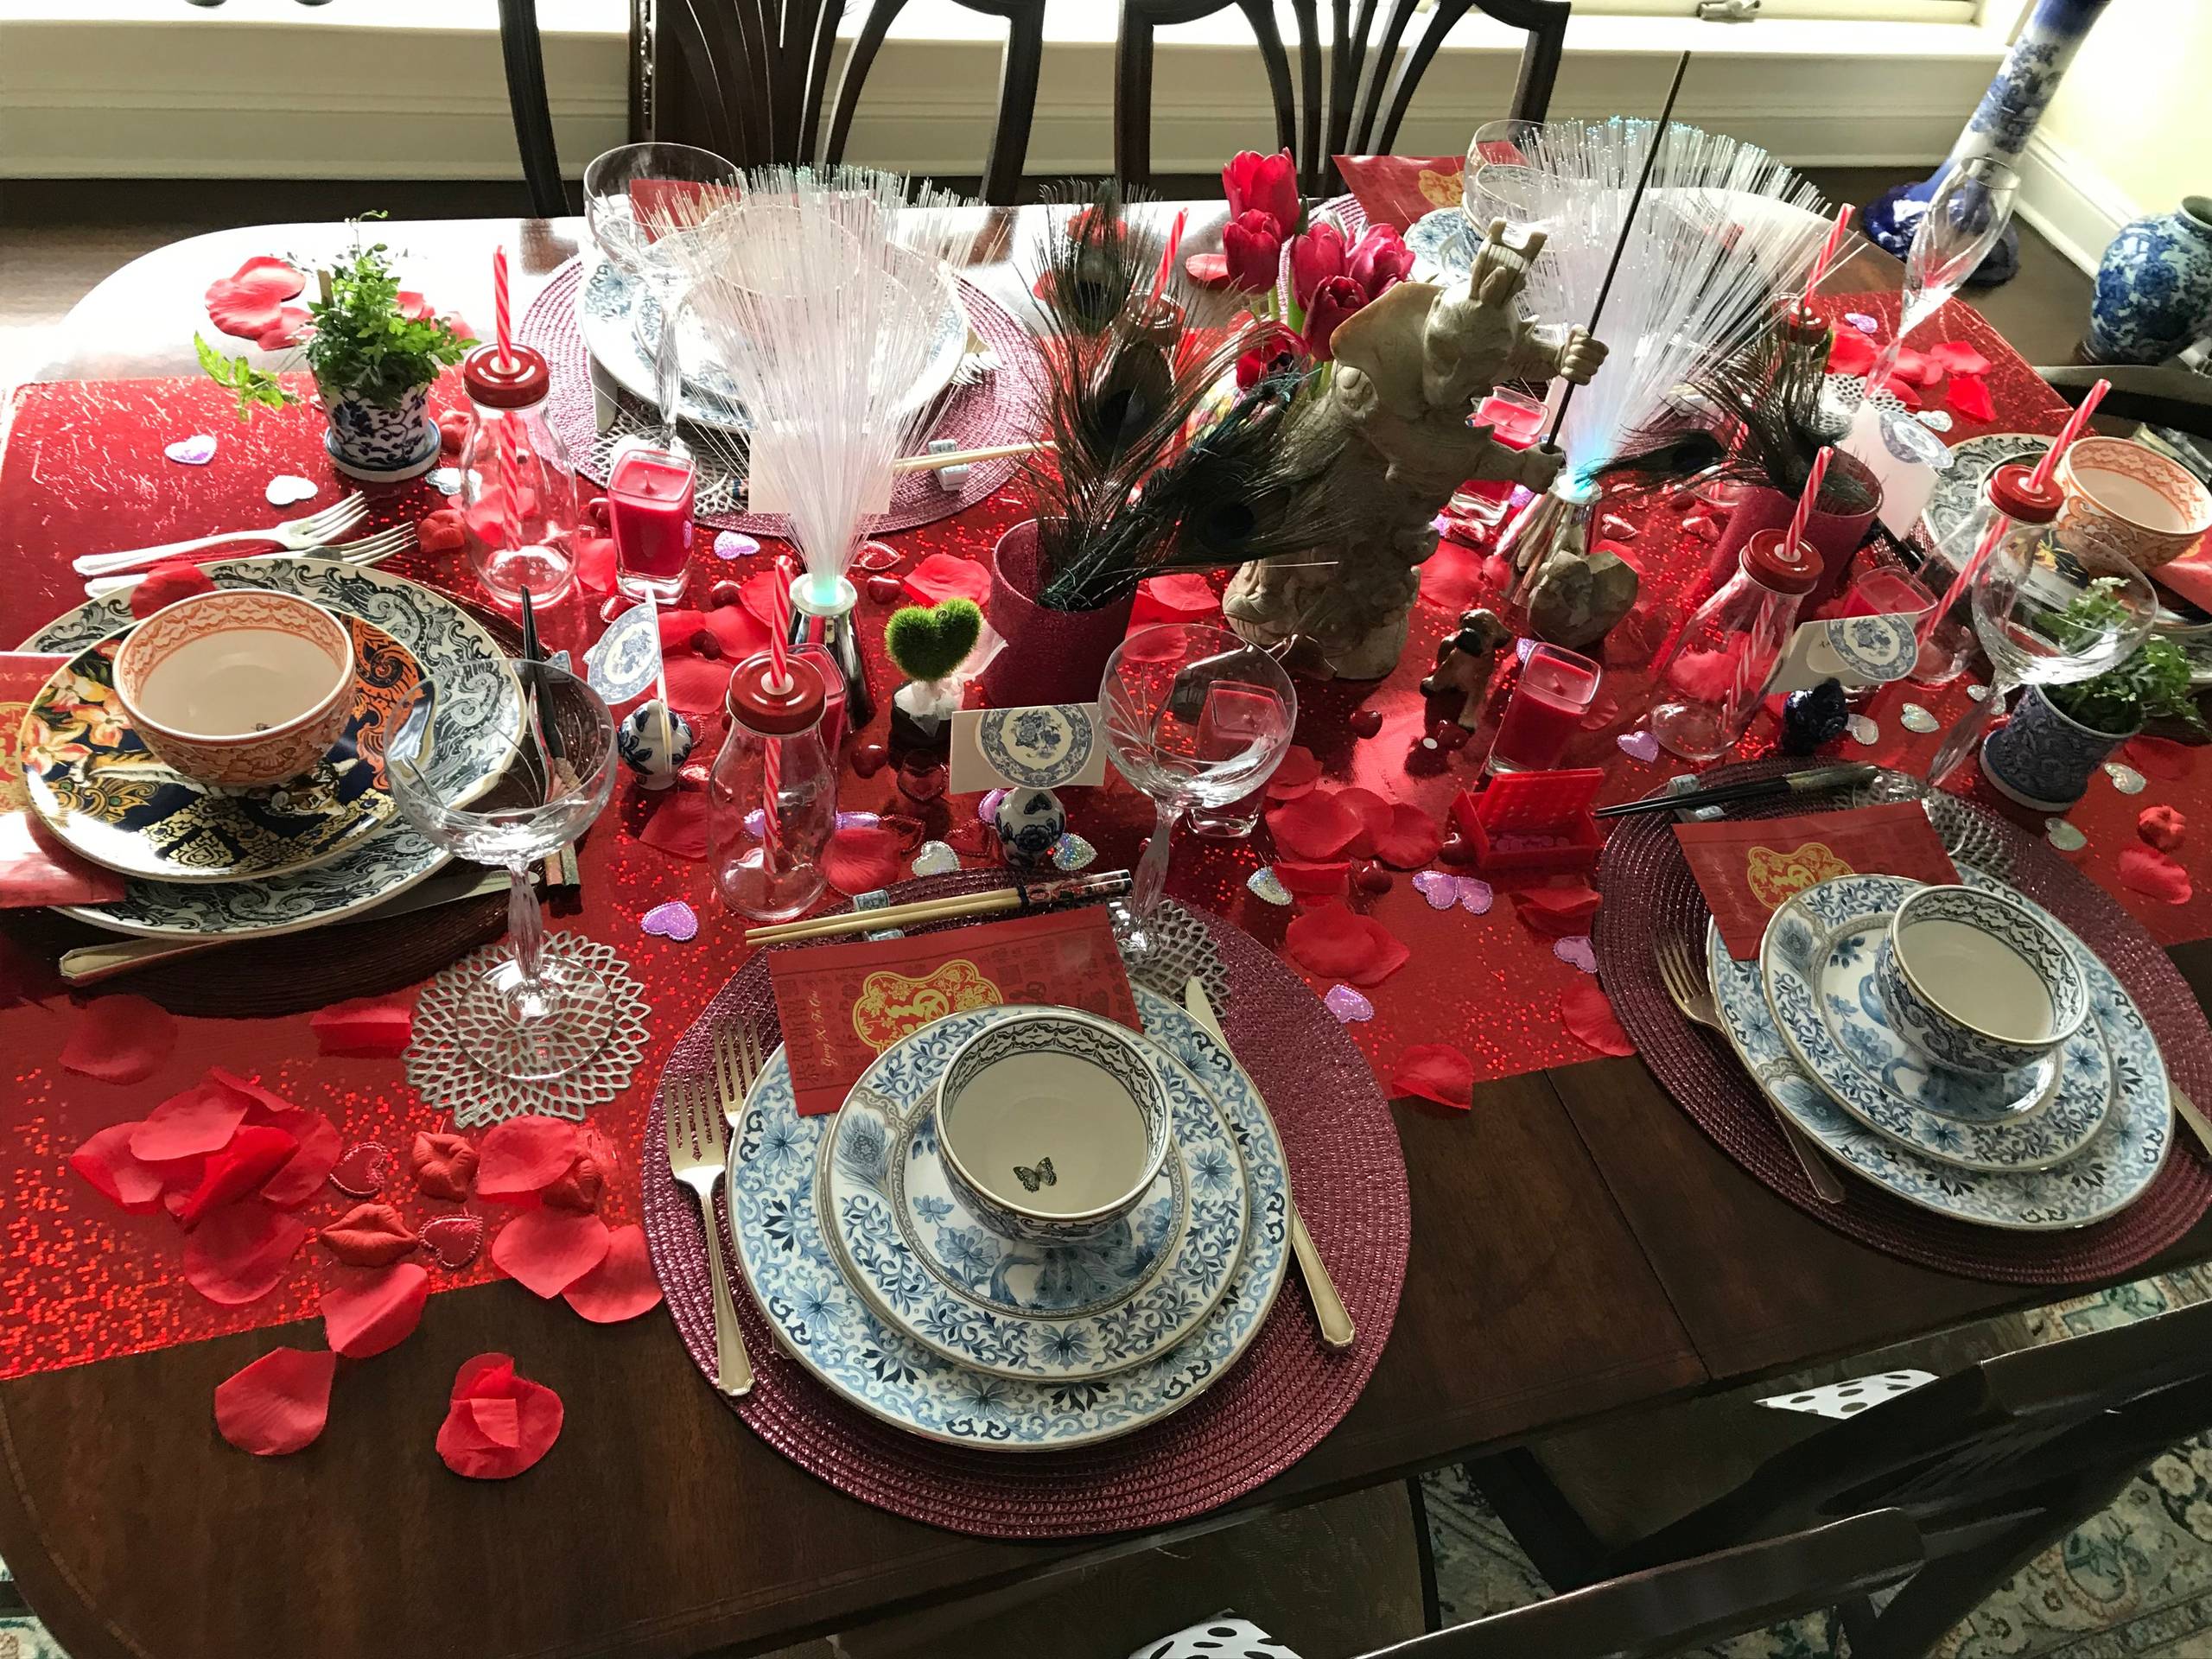 I See Red! Tablescape Designs ~ Valentine's Day/Lunar New Year Ladies Who Lunch